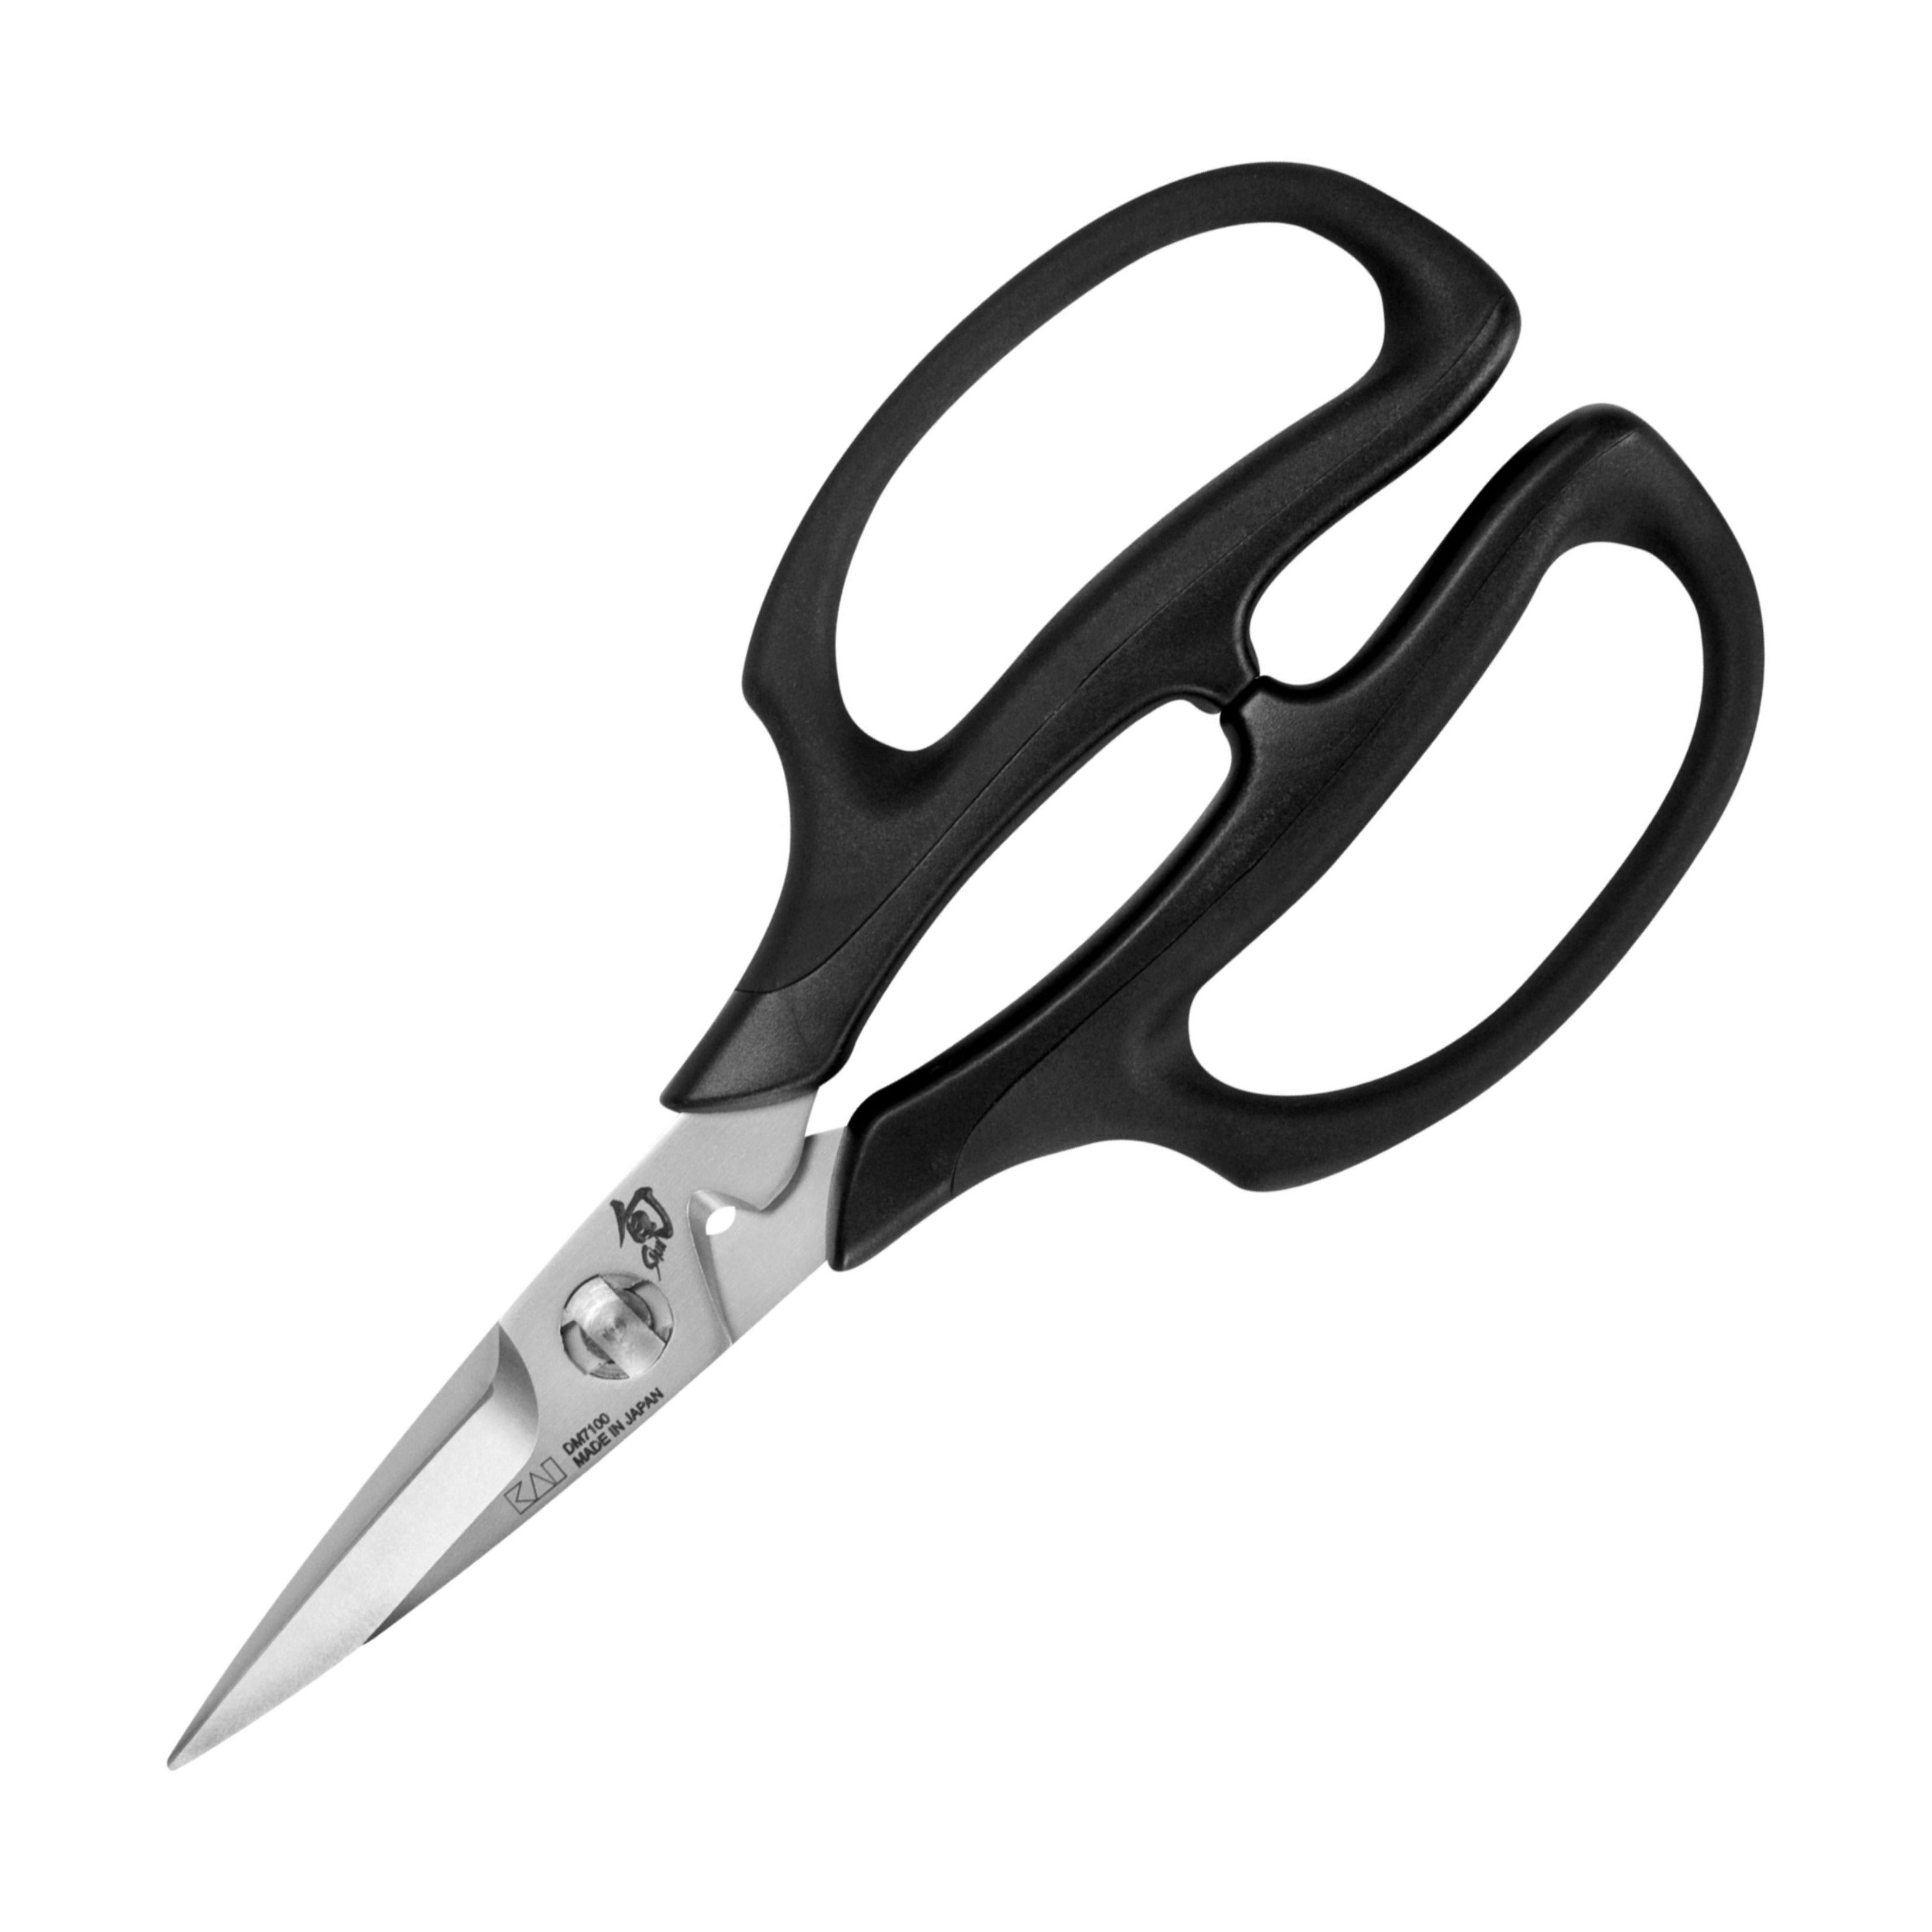 Shun Cutlery Herb Shears, Stainless Steel Cooking Scissors, Blades Separate  for Easy Cleaning, Comfortable, Non-Slip Handle, Kitchen Shears Heavy Duty